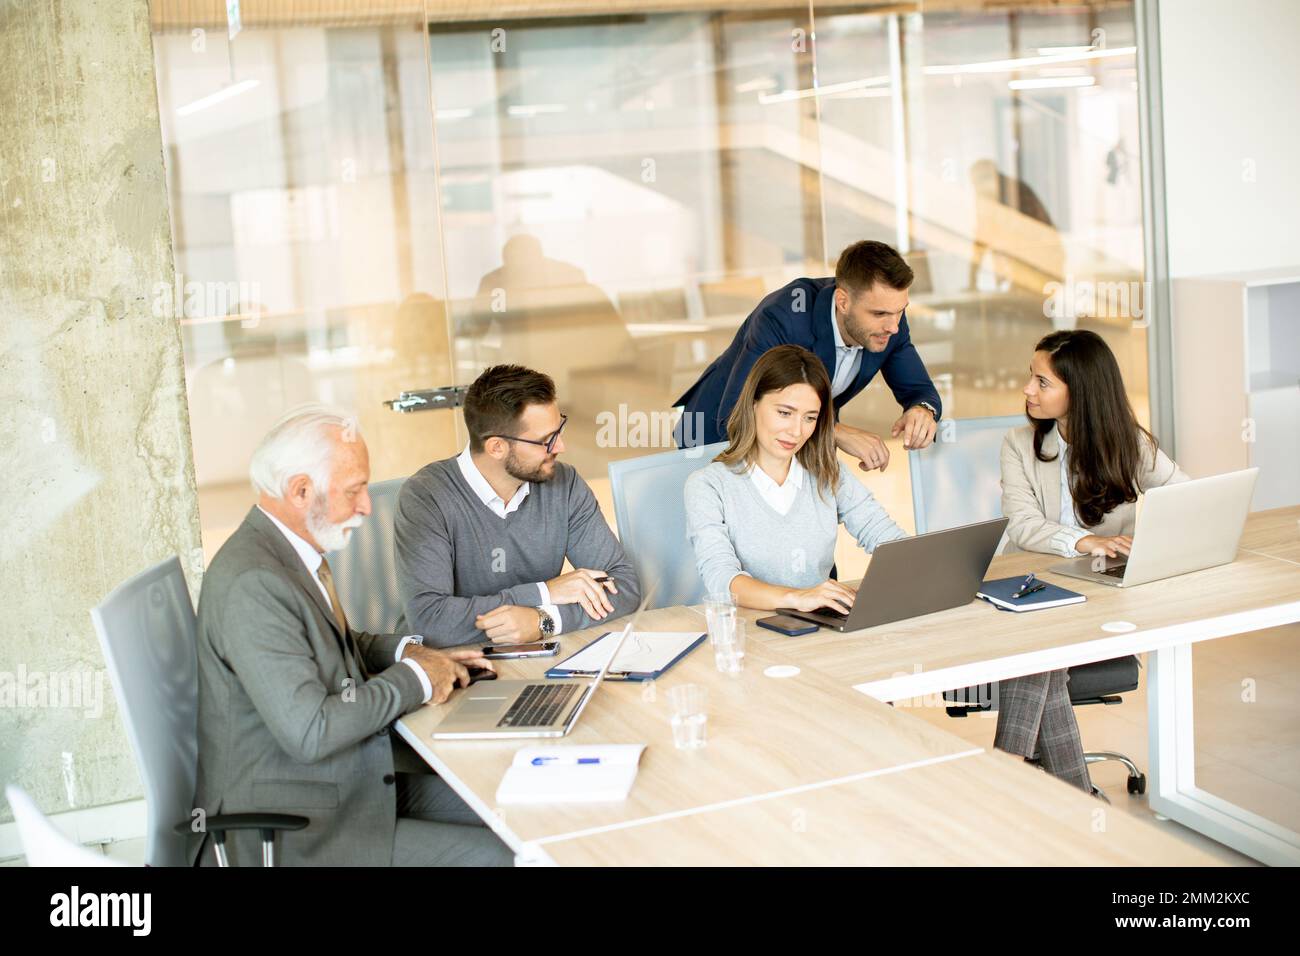 Group of businessmen and businesswomen working together in office Stock Photo